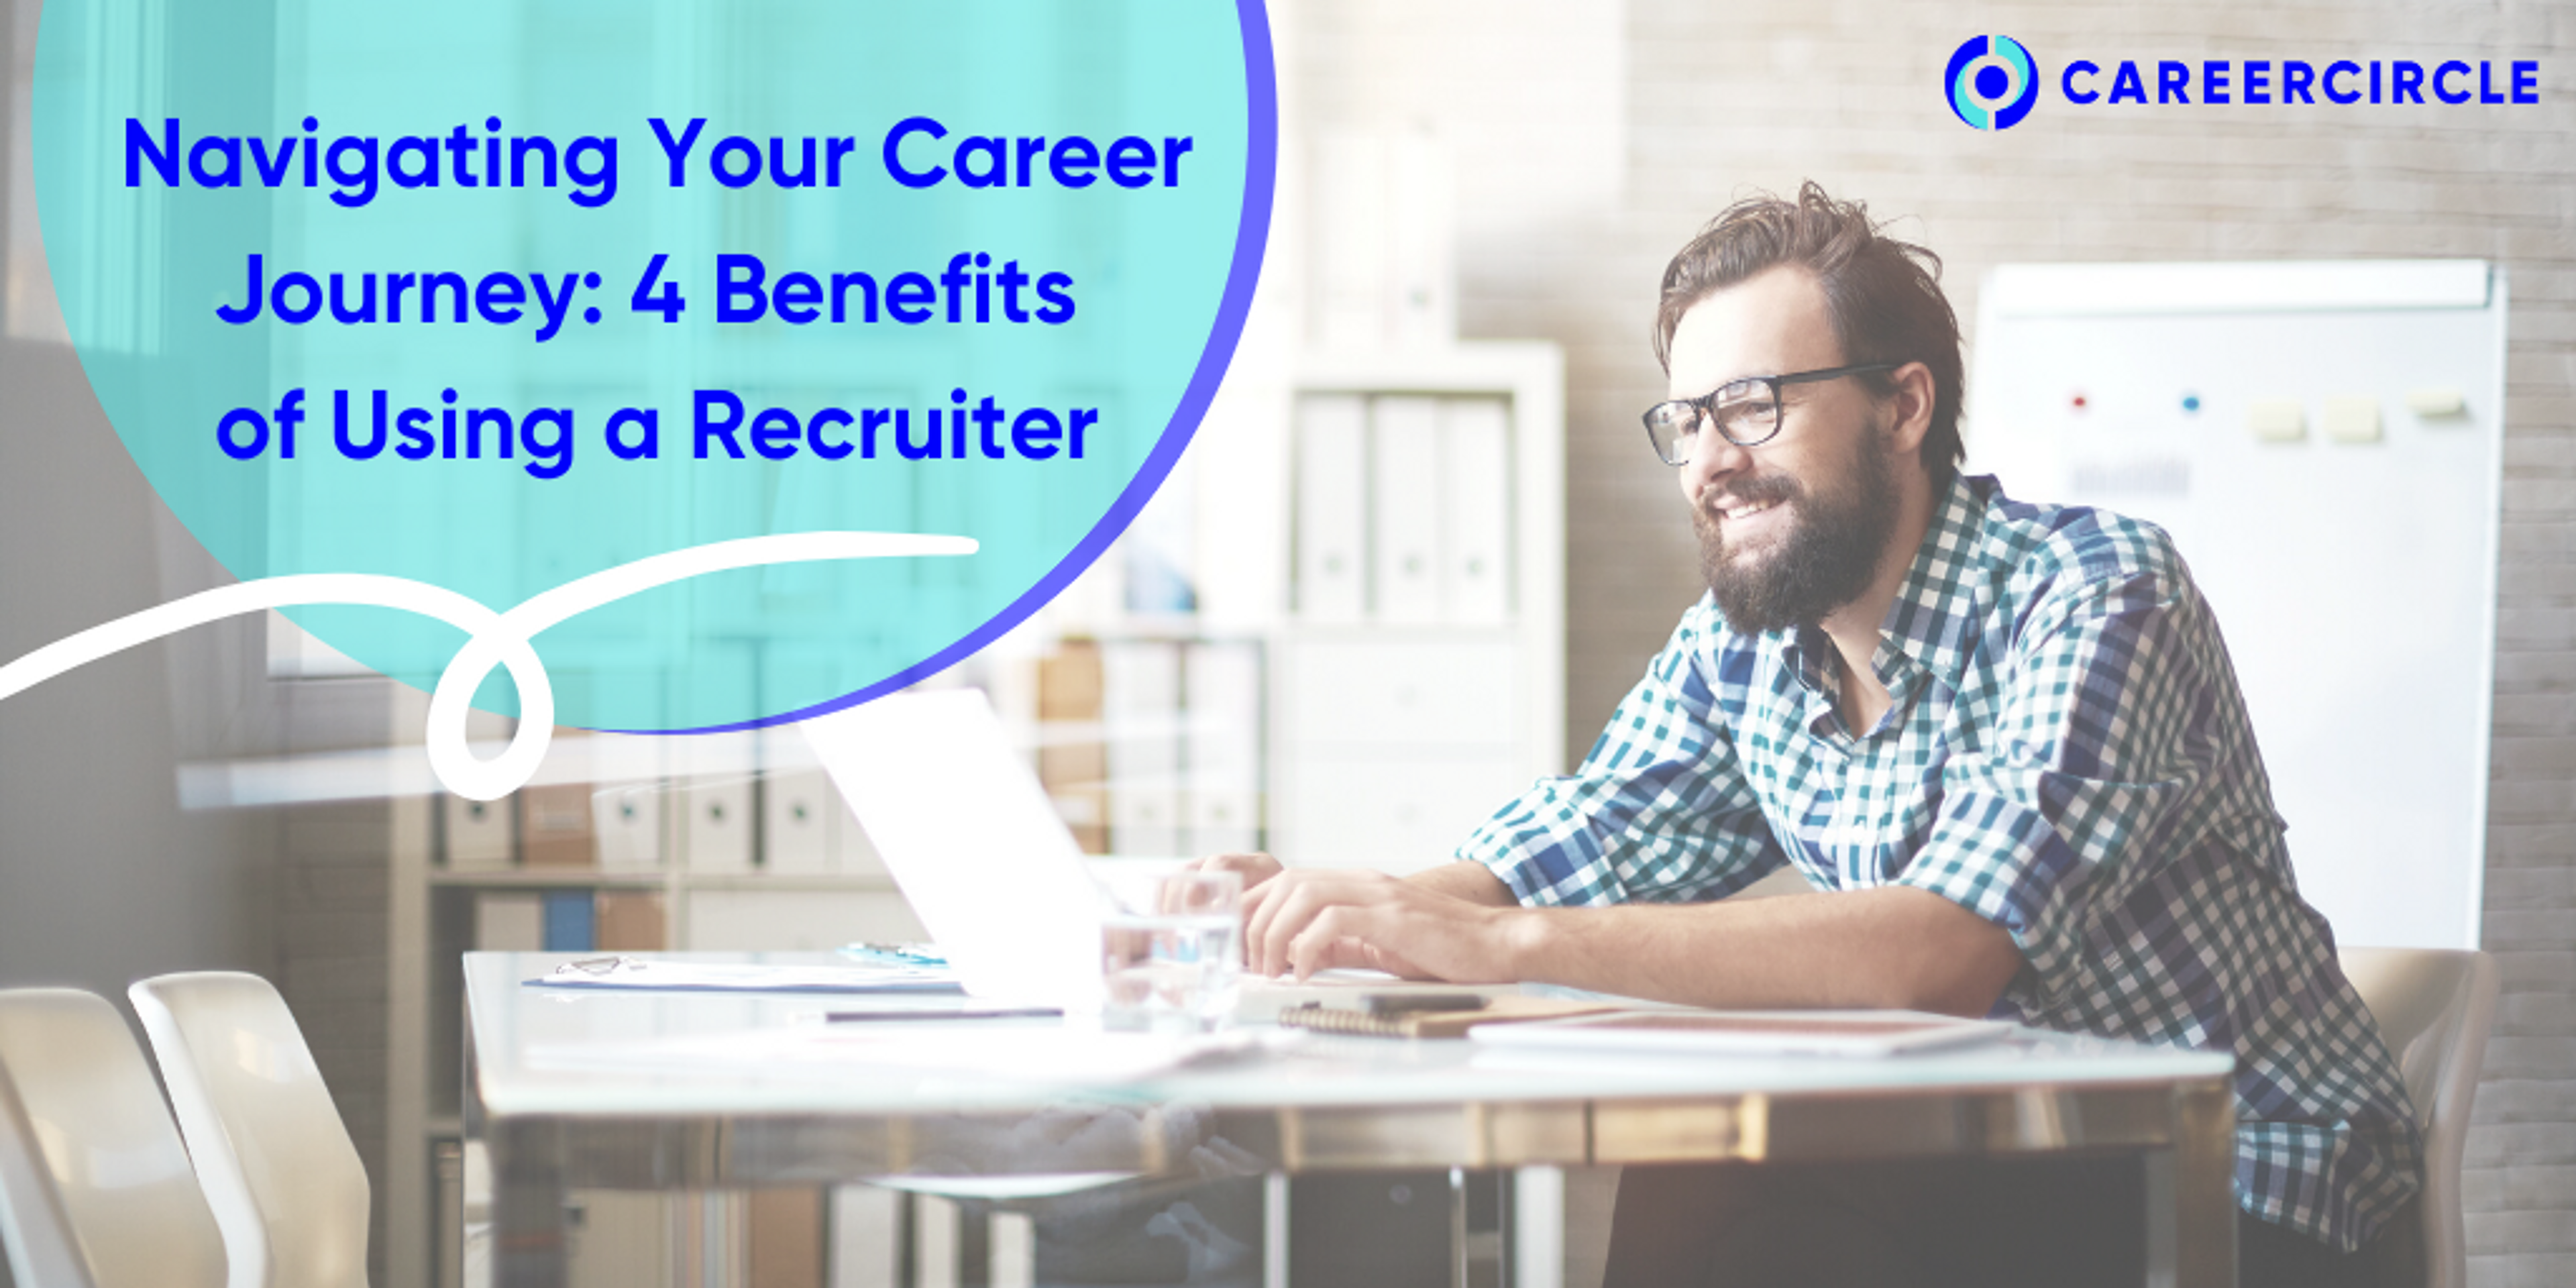 image of a man sitting at a desk with text: Navigating Your Career Journey: 4 Benefits of Using a Recruiter